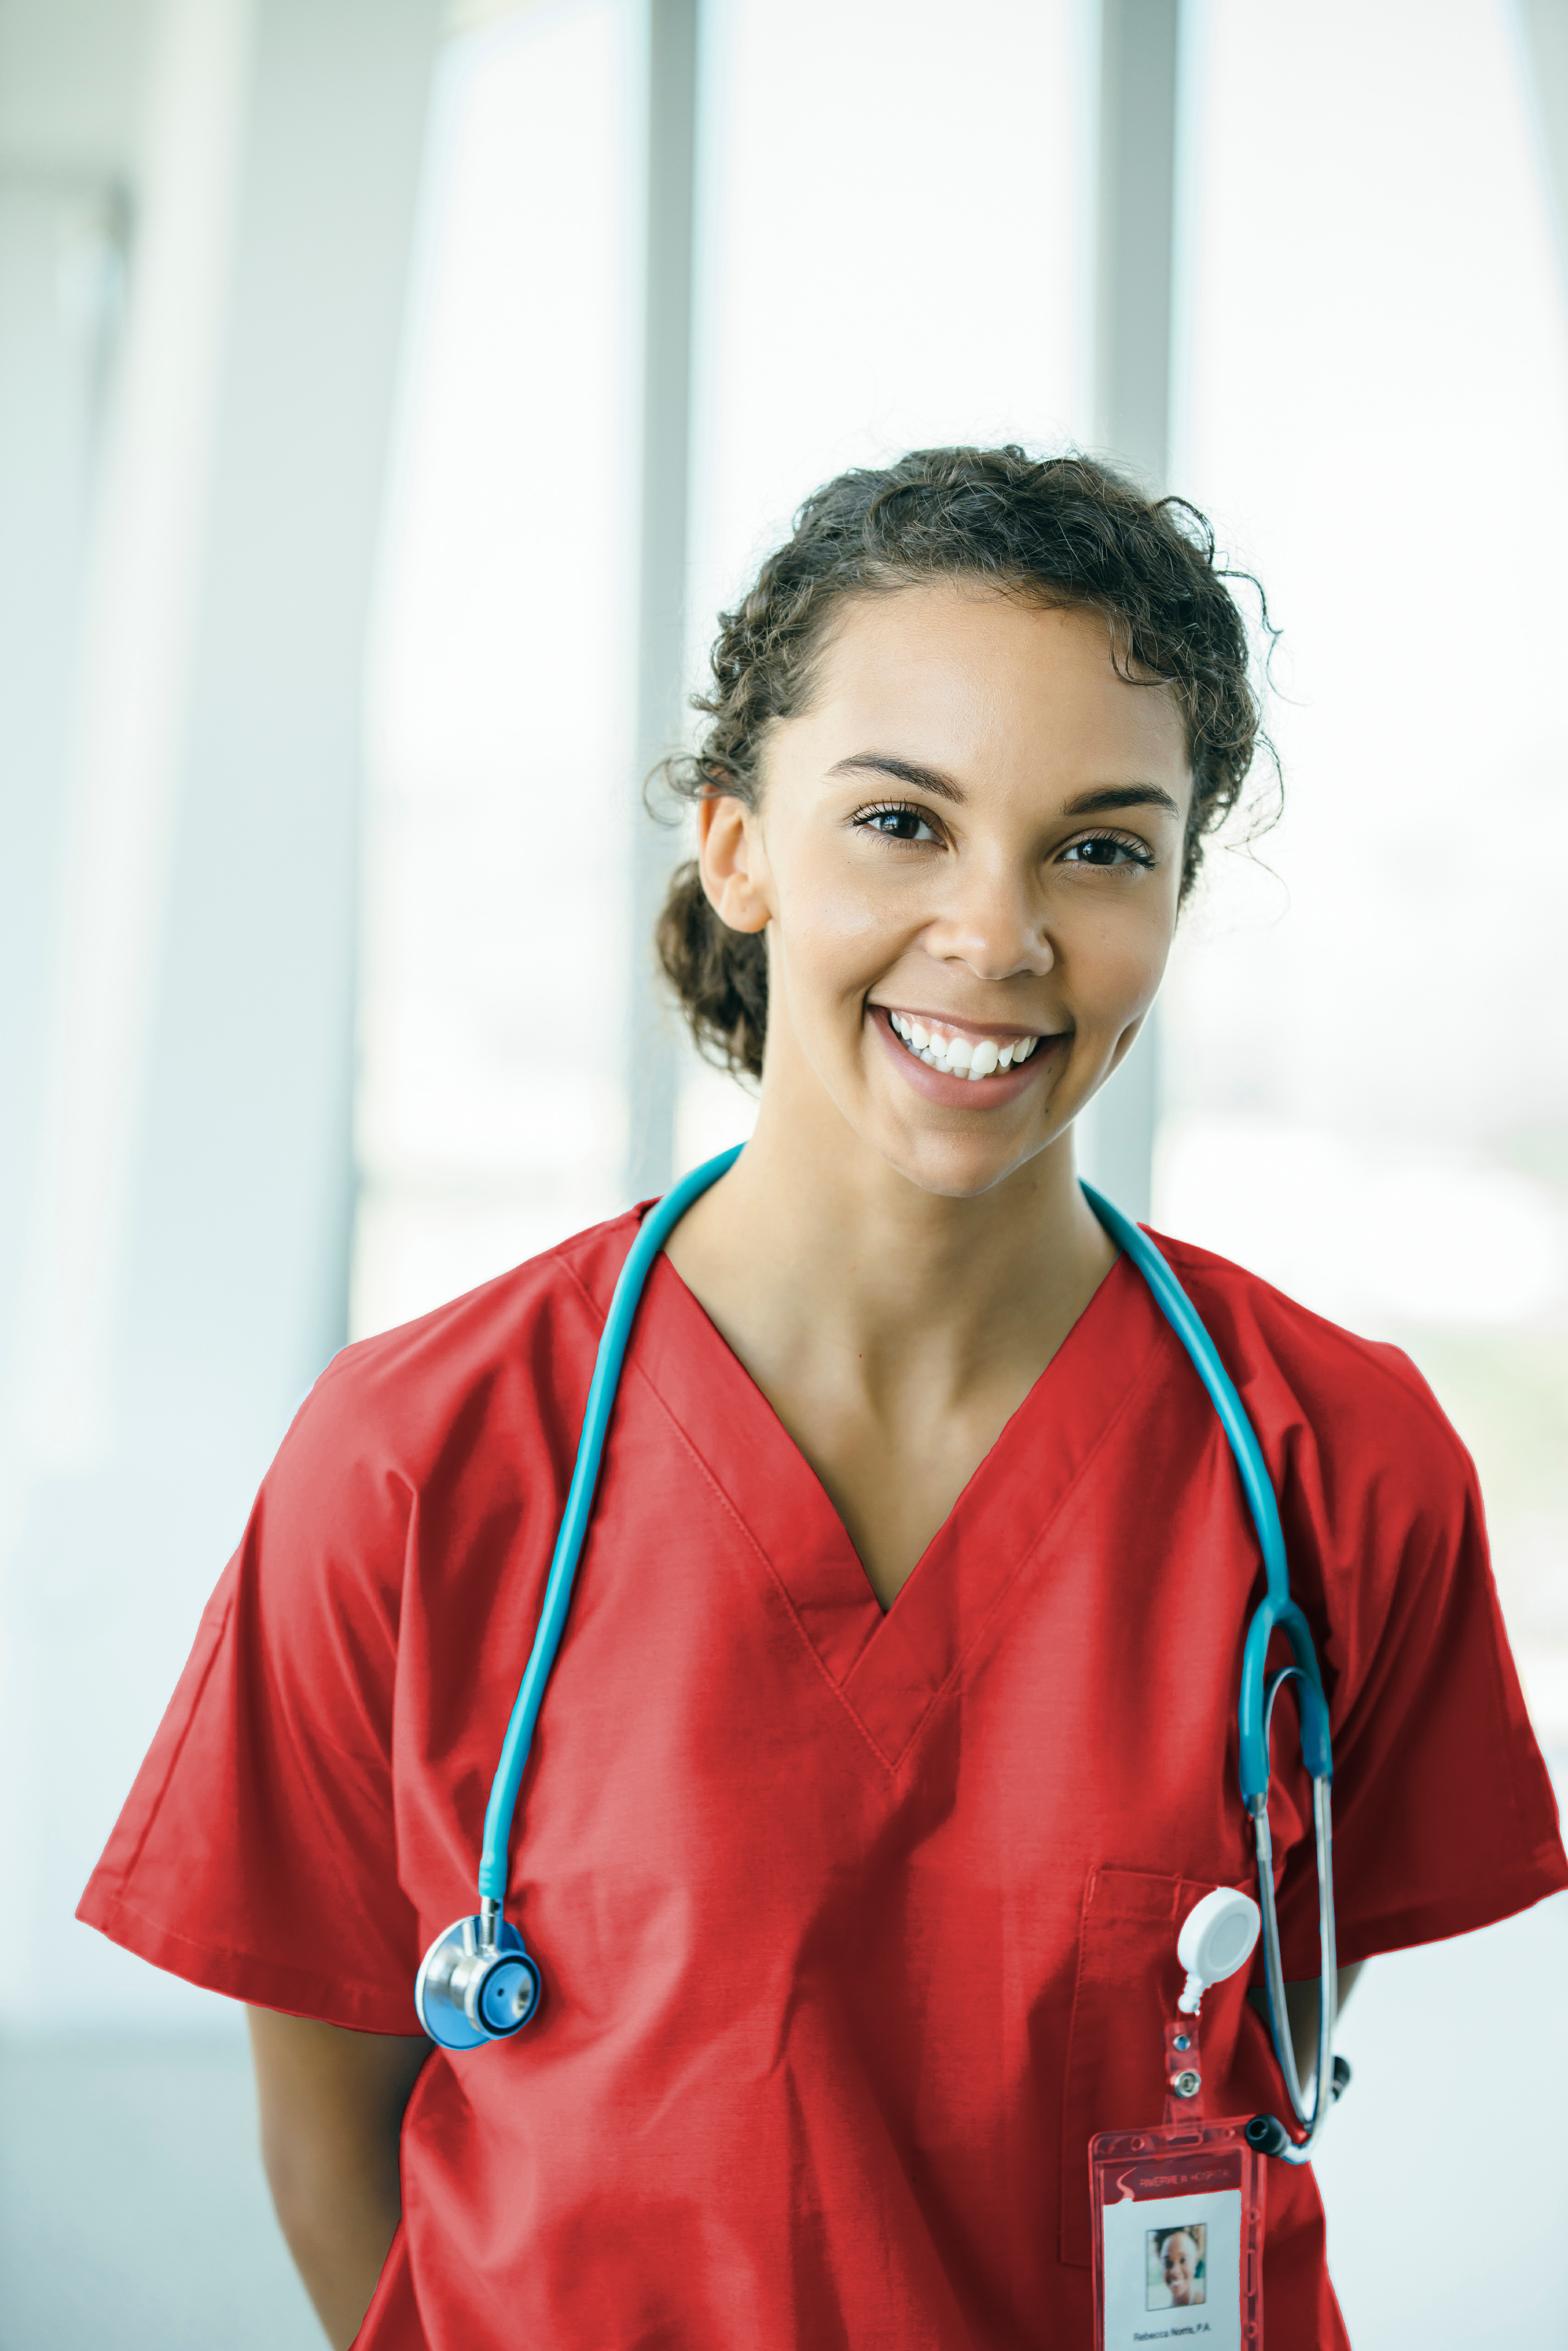 RNs with their BS in Nursing have access to a broad range of job opportunities.